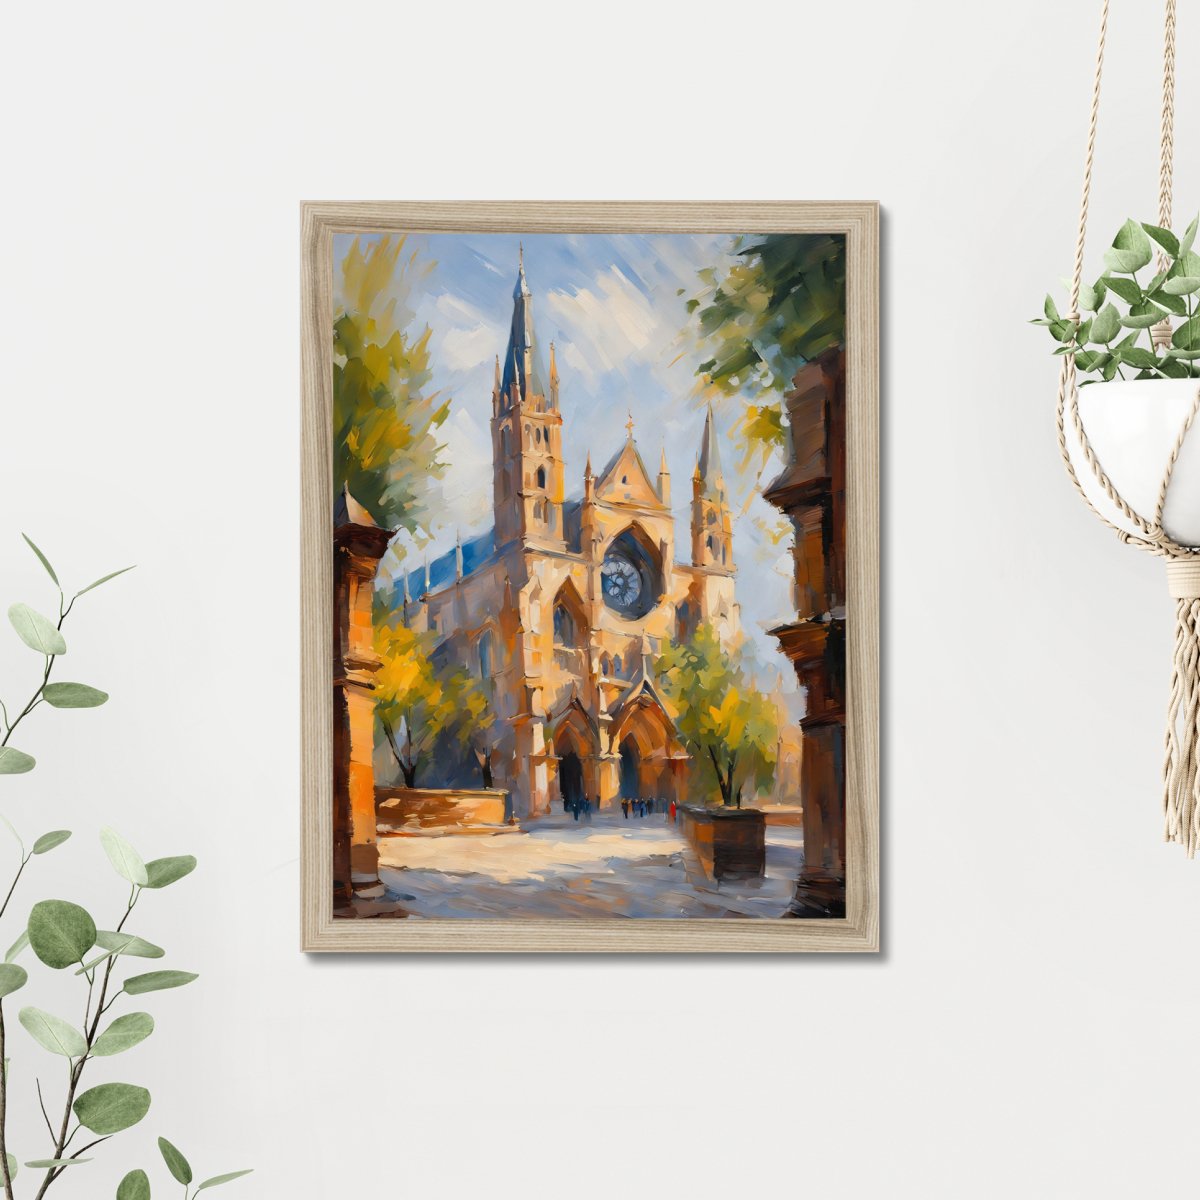 Western holy basilica - Art print - Poster - Ever colorful